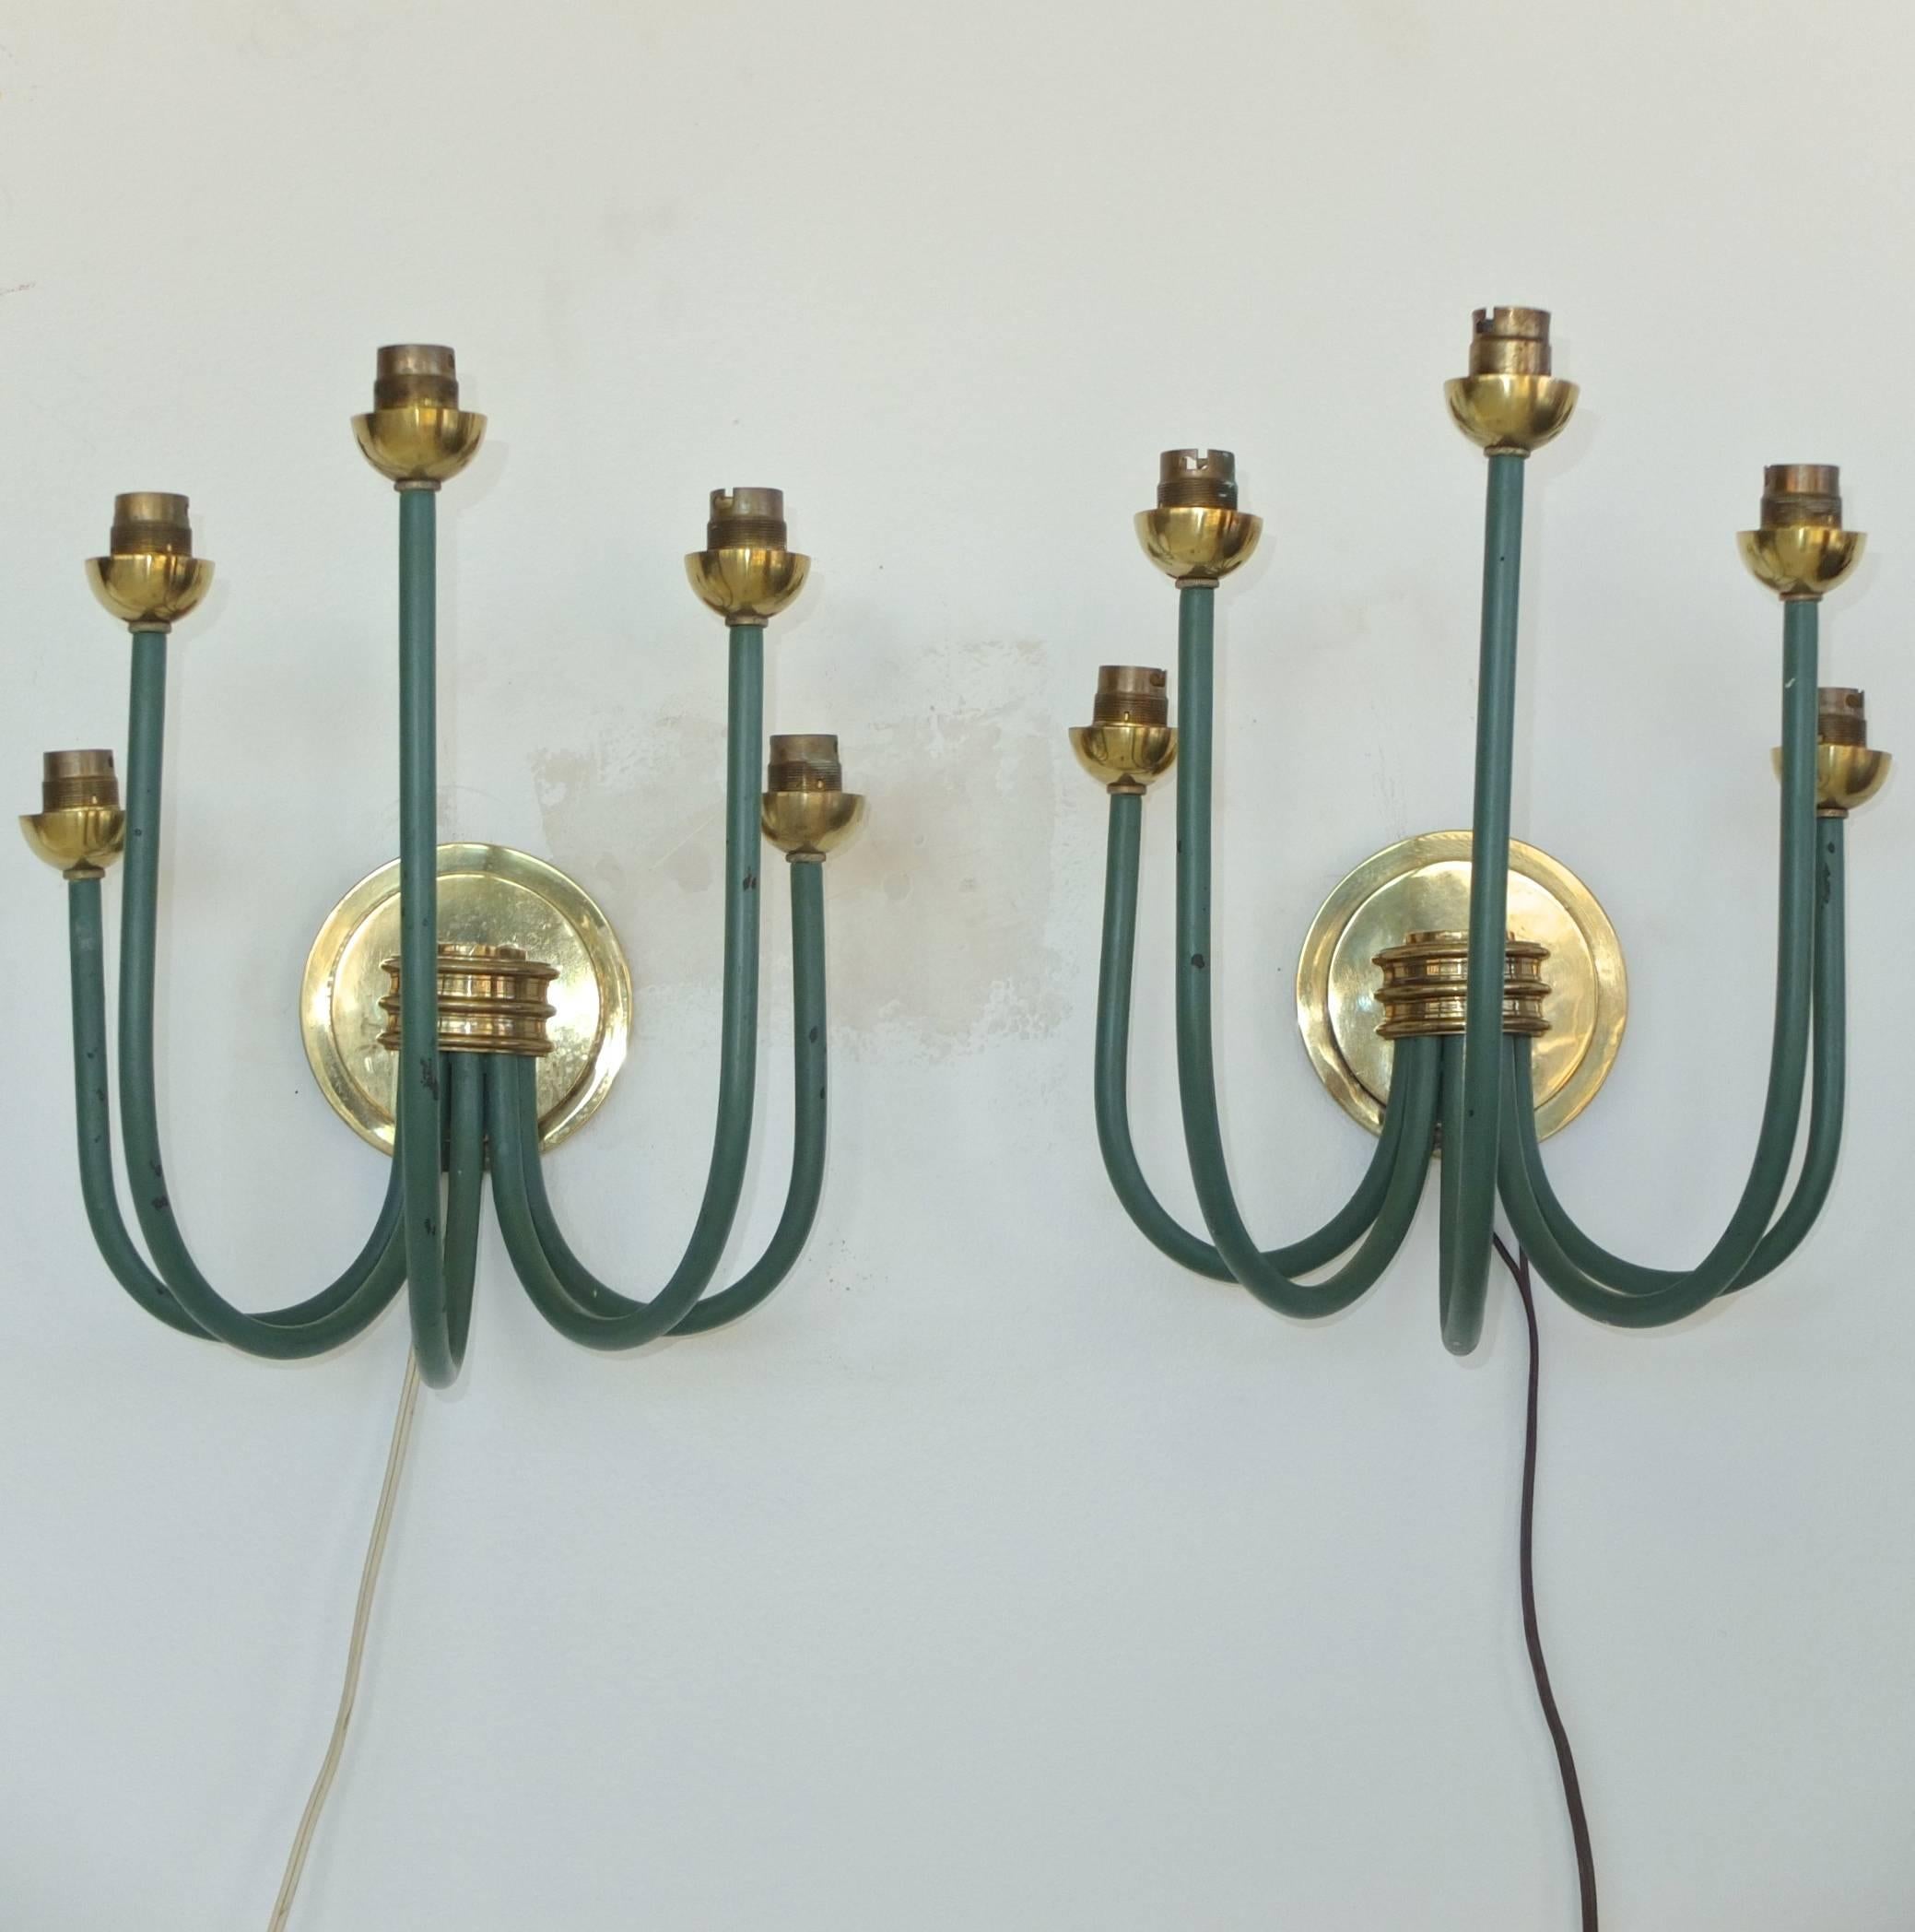 Striking and generously proportioned vintage French candelabra sconces in the style of Jean Royère, 1950s.

Hefty brass round backplate with brass cluster mount, from which sprout five upwardly curved candelabra arms of ascending/descending height